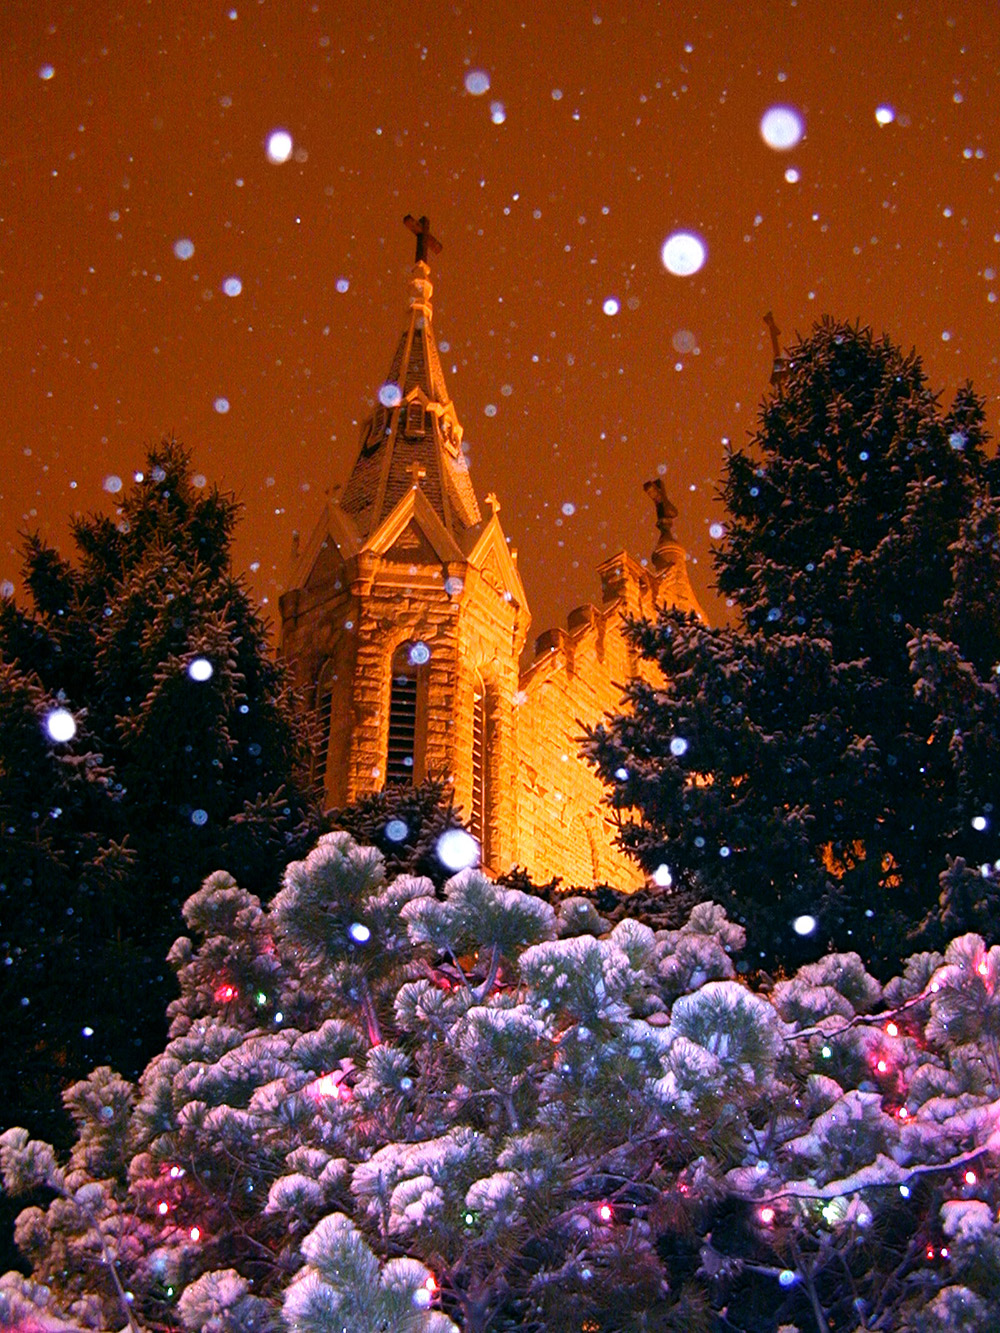 A snowy Christmas scene in front of St. John's.